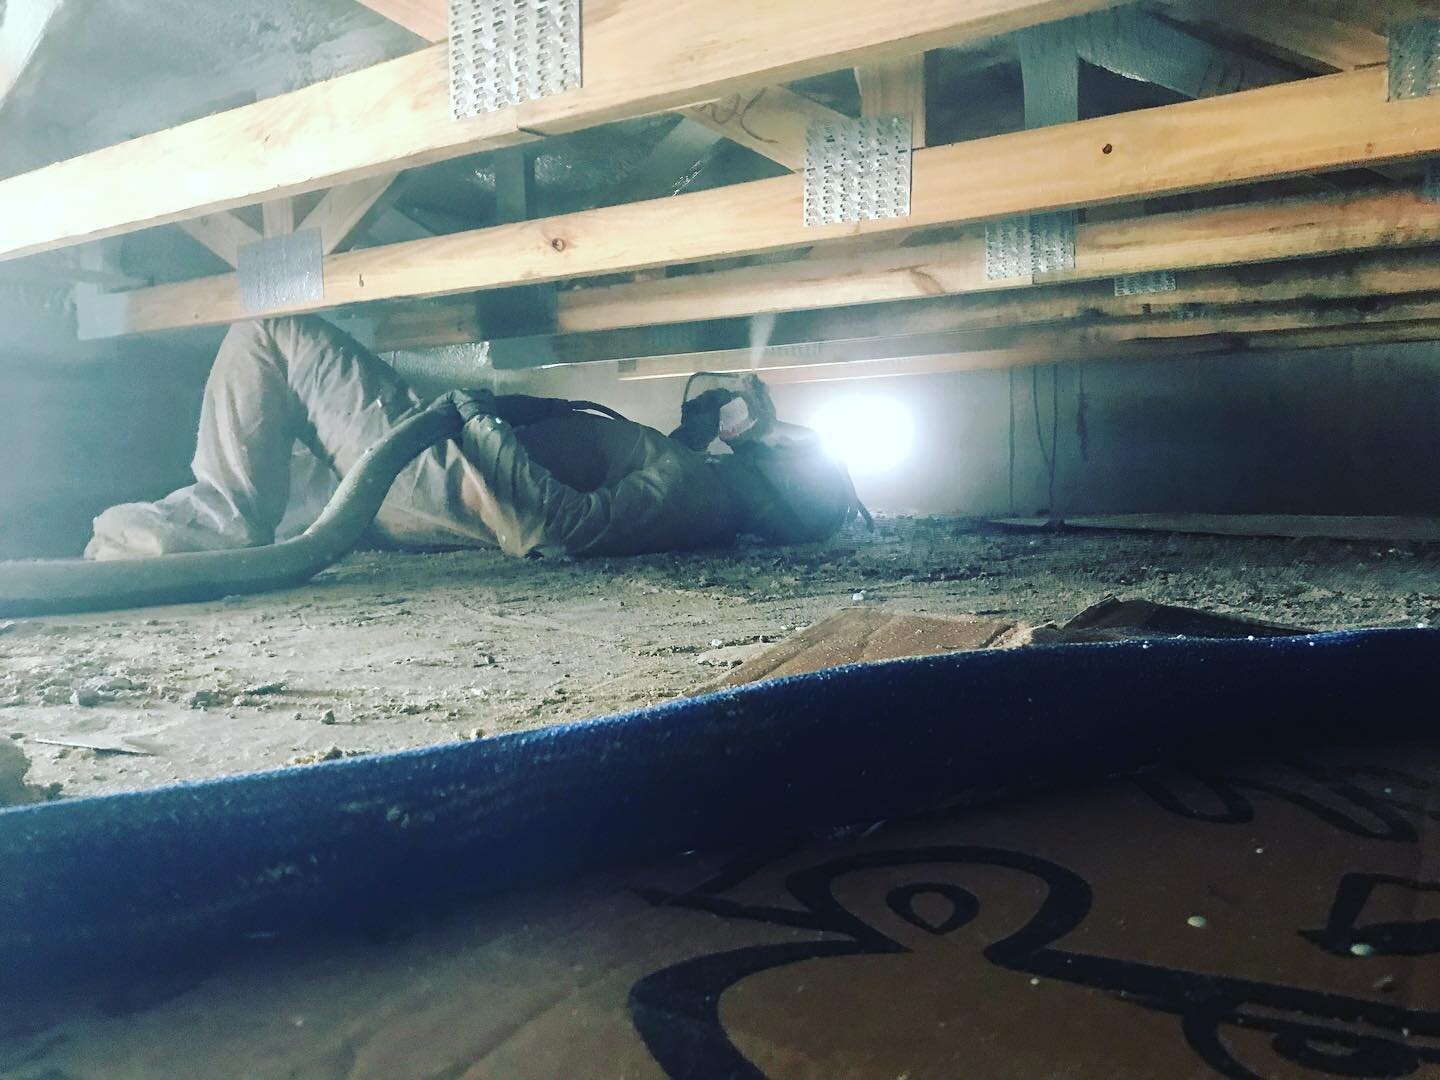 You need spray foam insulation where? Yeah we can do that!  #currentsituation  #sprayfoam #crawlspace #vaporbarriers #sprayfoaminsulation #centralflorida #current #newconstruction #remodels #update #clean #energysolutions #getsprayed 
Contact us toda